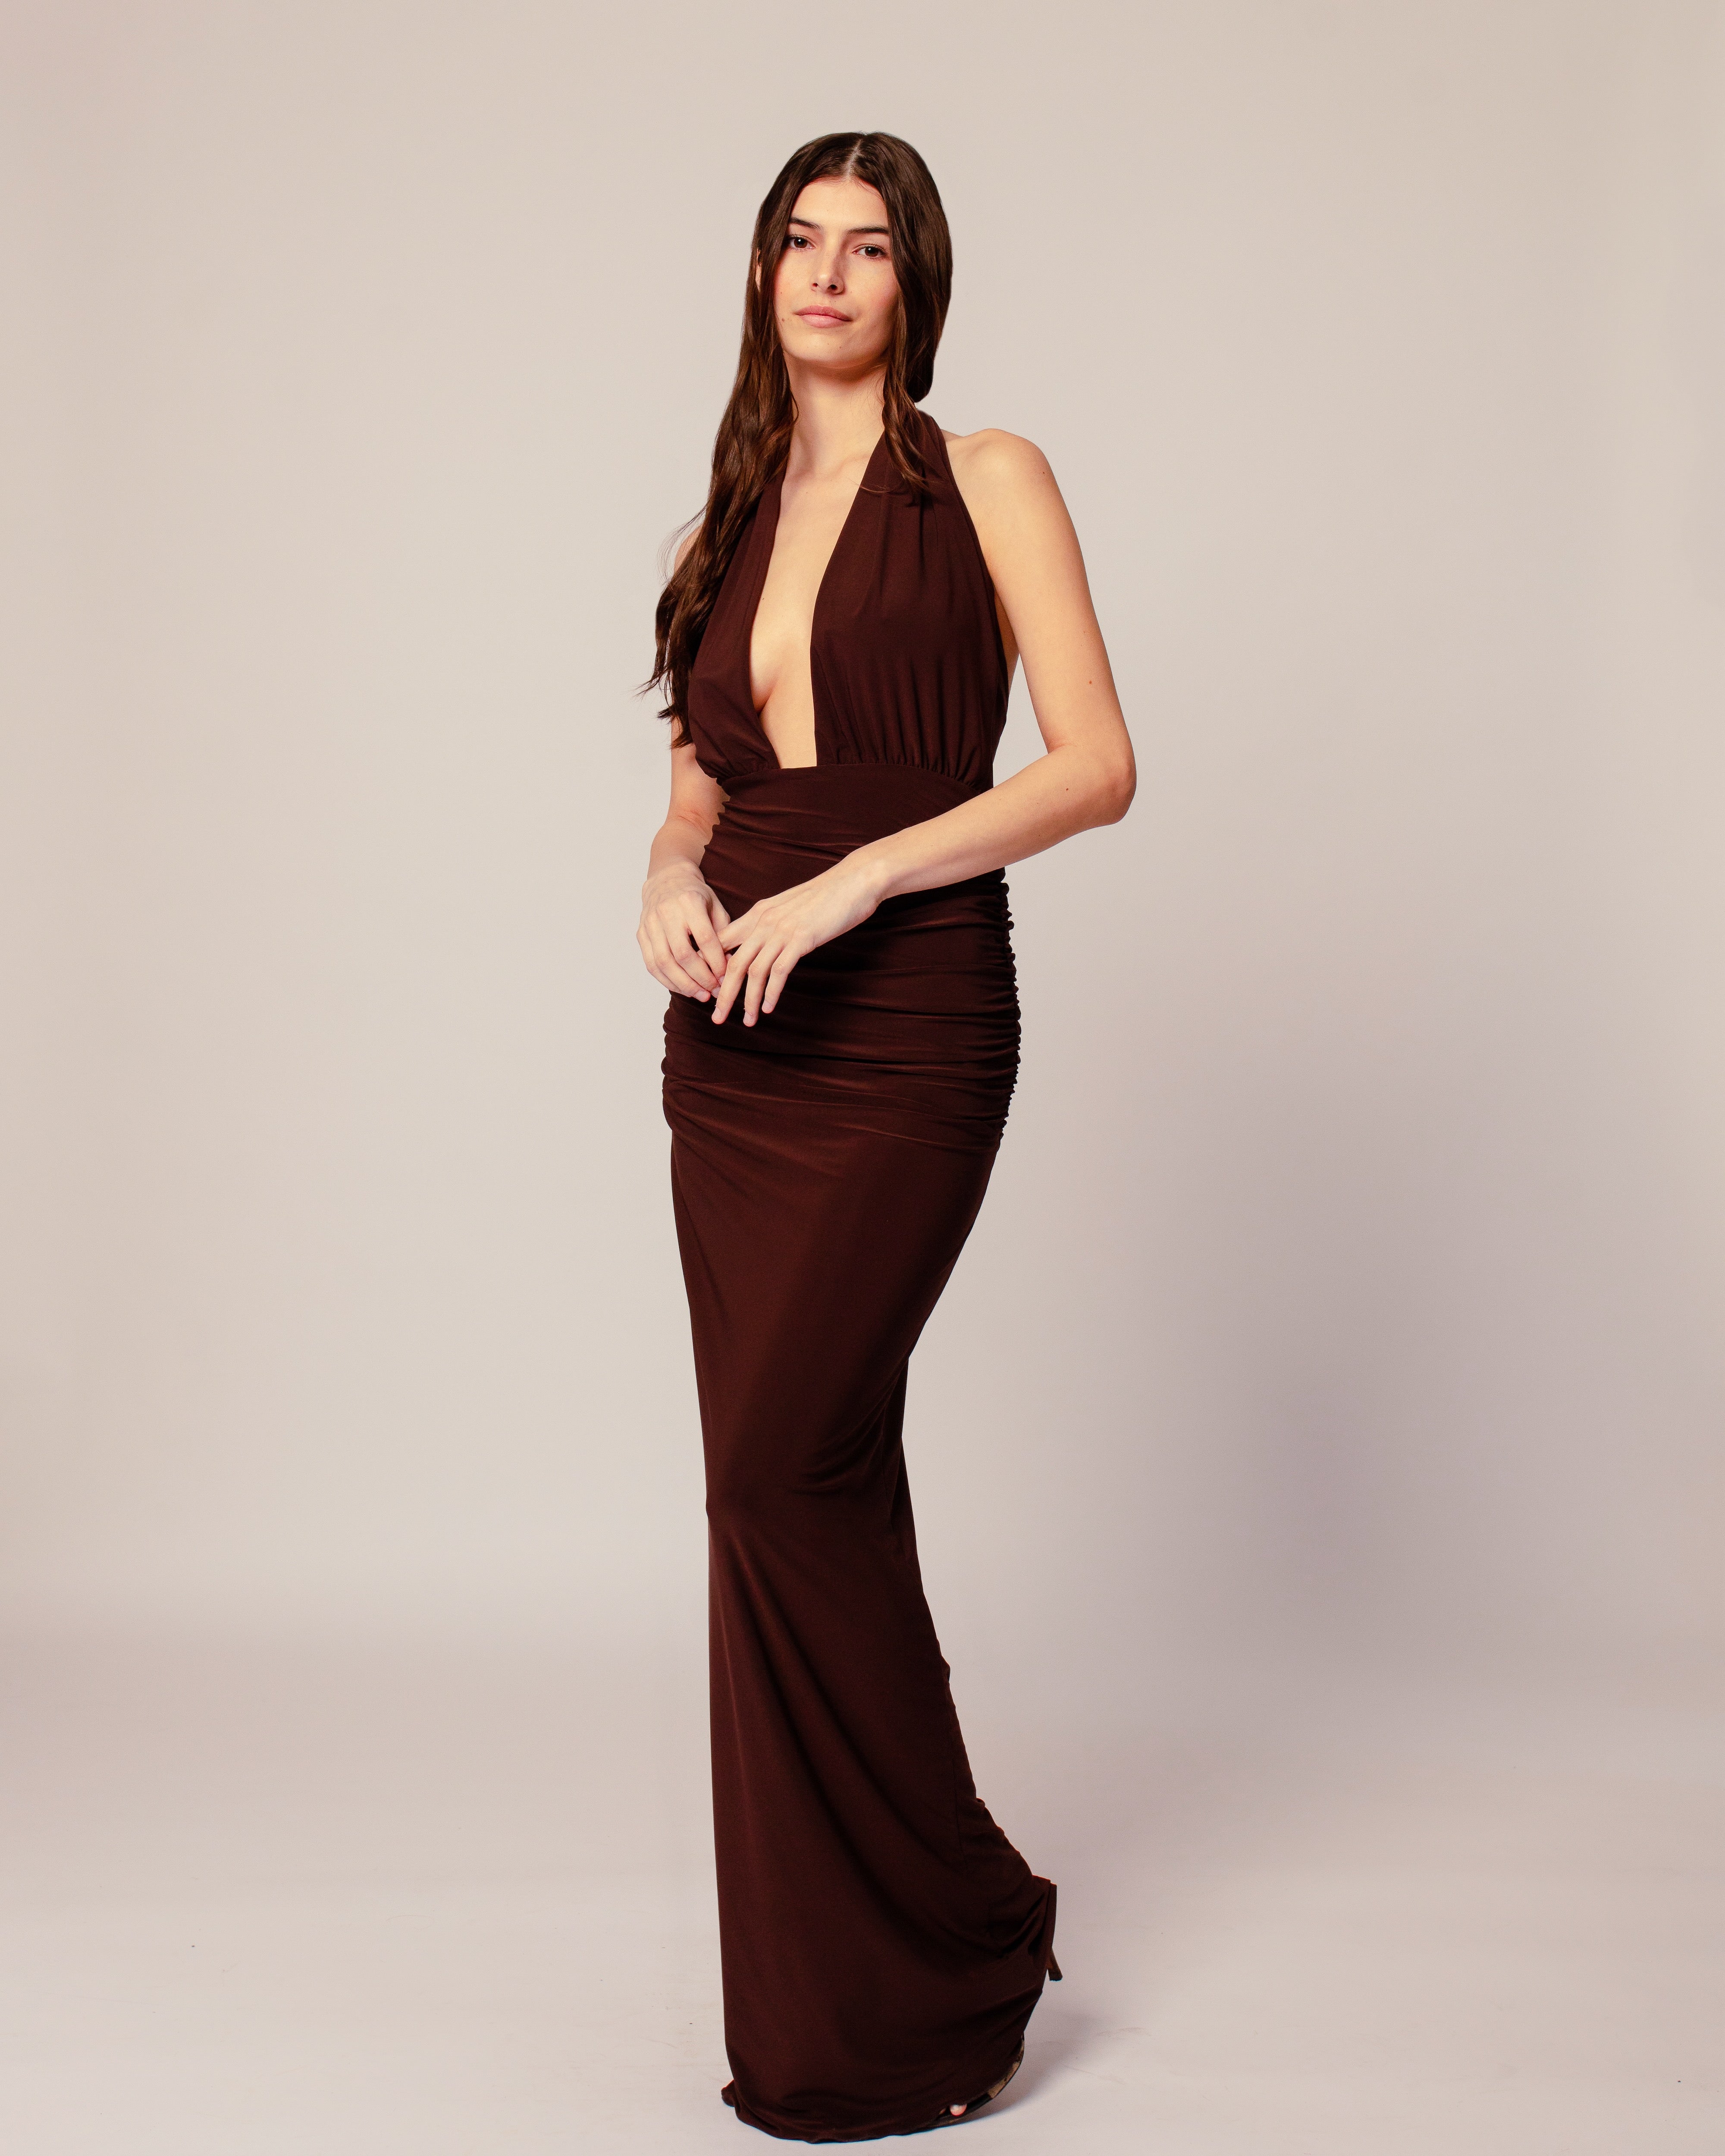 Halter Dress in Chocolate Brown